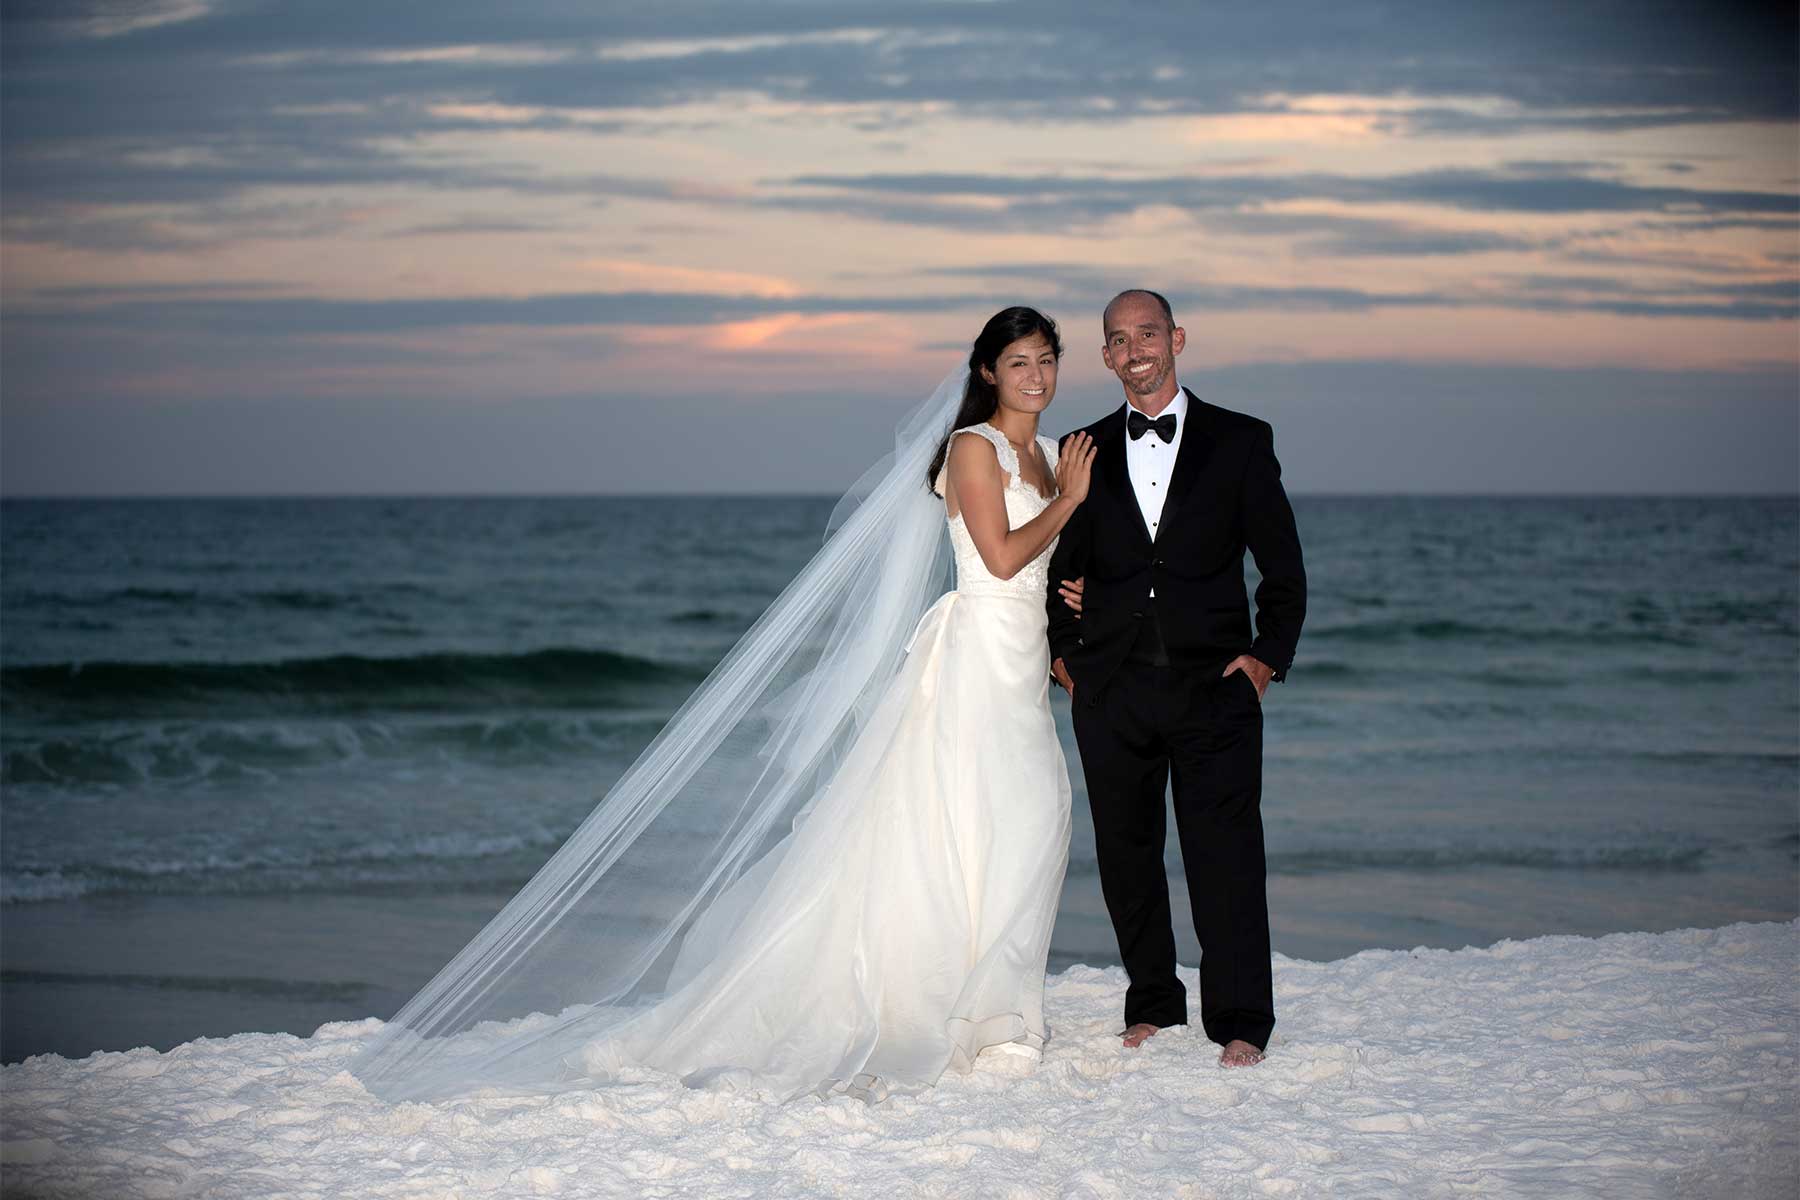 A bride and groom in formal attire on the beach at sunset